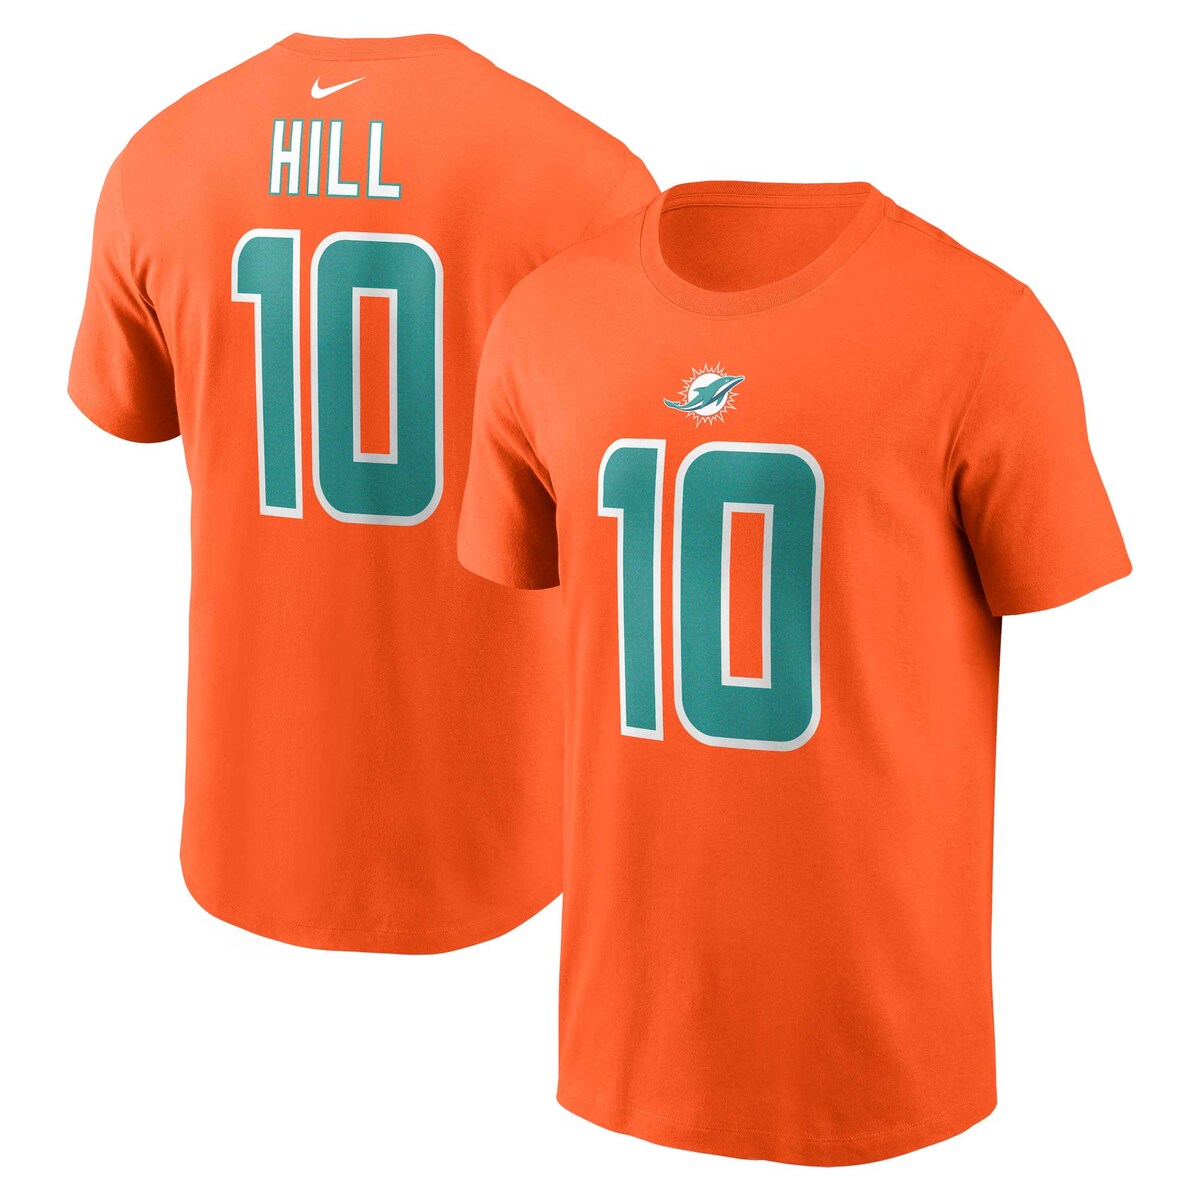 Tyreek Hill is consistently one of the most dominant players on the gridiron. This Player Name and Number T-shirt from Nike is a strong tribute to your favorite player's career with the Miami Dolphins. Designed as a simple alternative to the on-field jerseys, this player tee features bold graphics on the front and back so you can proudly support your Miami Dolphins.Crew neckOfficially licensedBrand: NikeMaterial: 100% CottonImportedShort sleeveMachine wash, tumble dry lowScreen print graphics